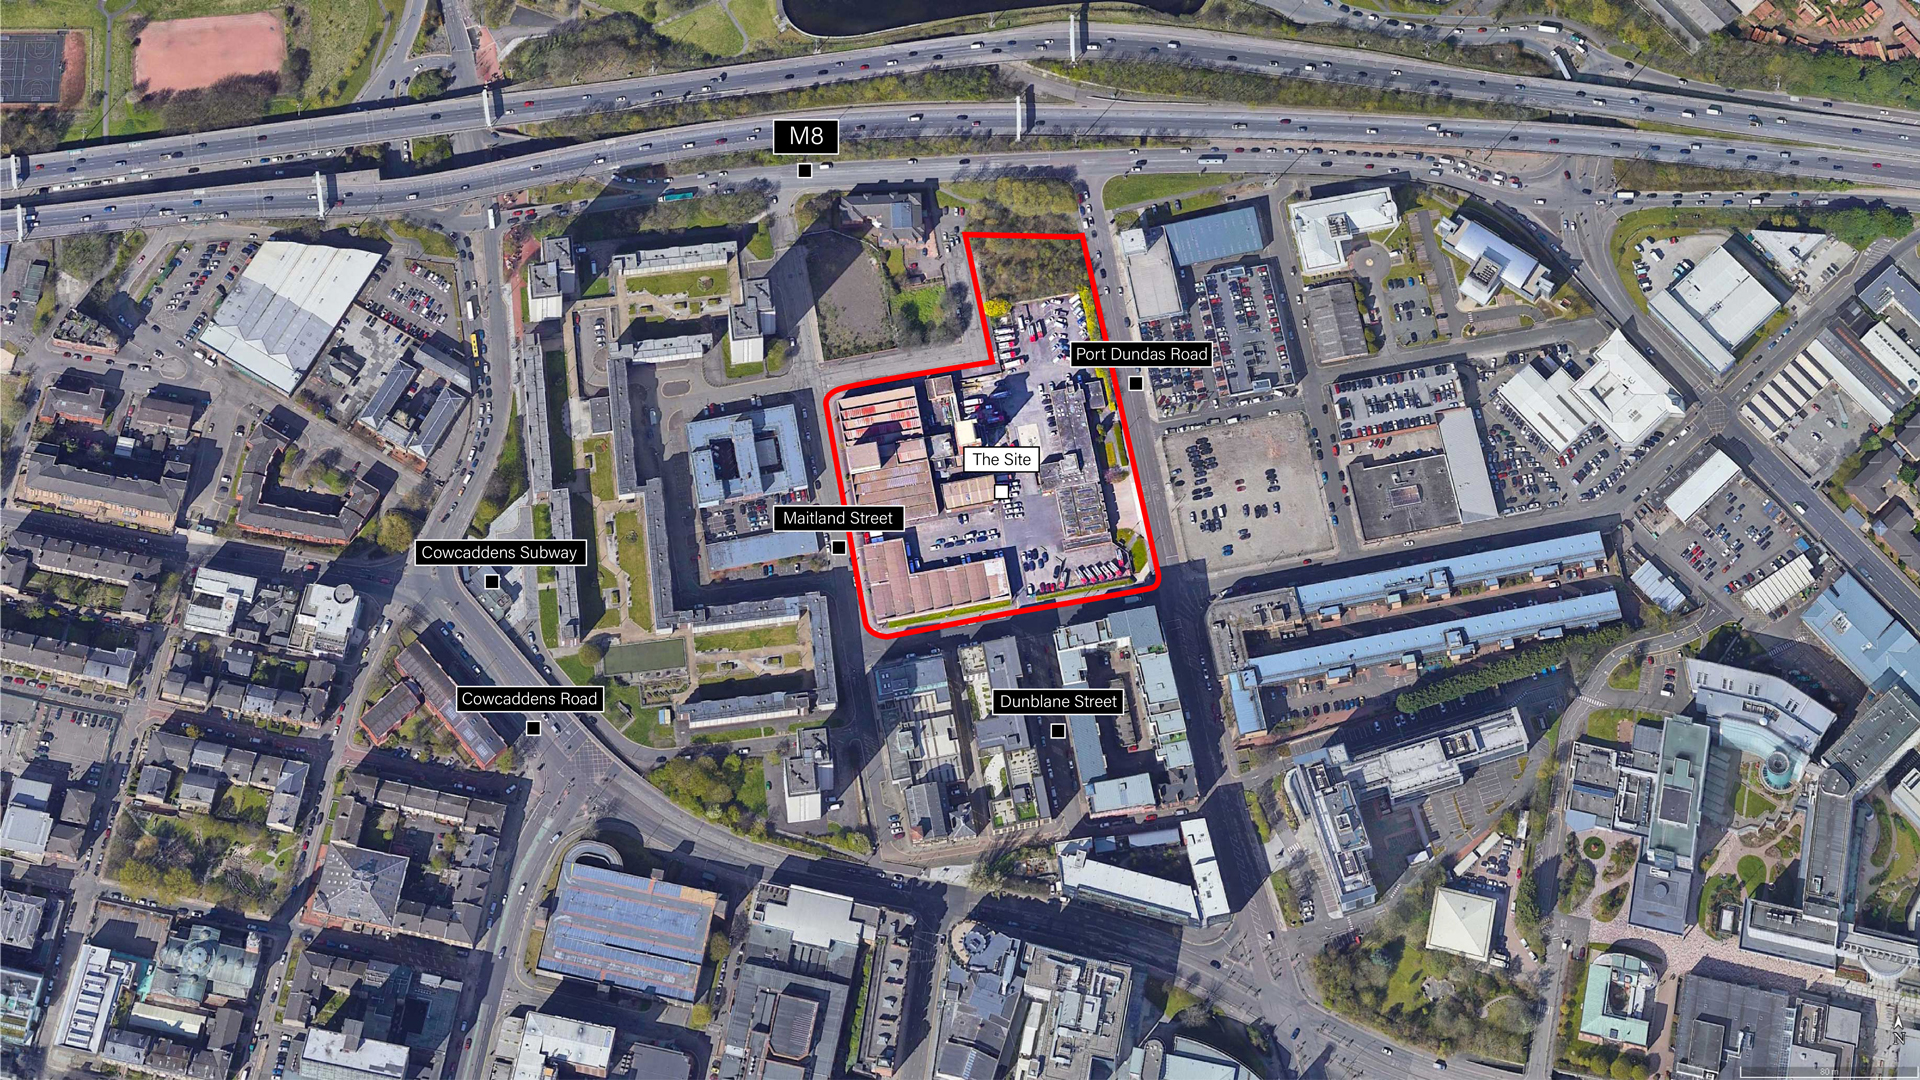 Fire service consults on development proposal at redundant Cowcaddens site